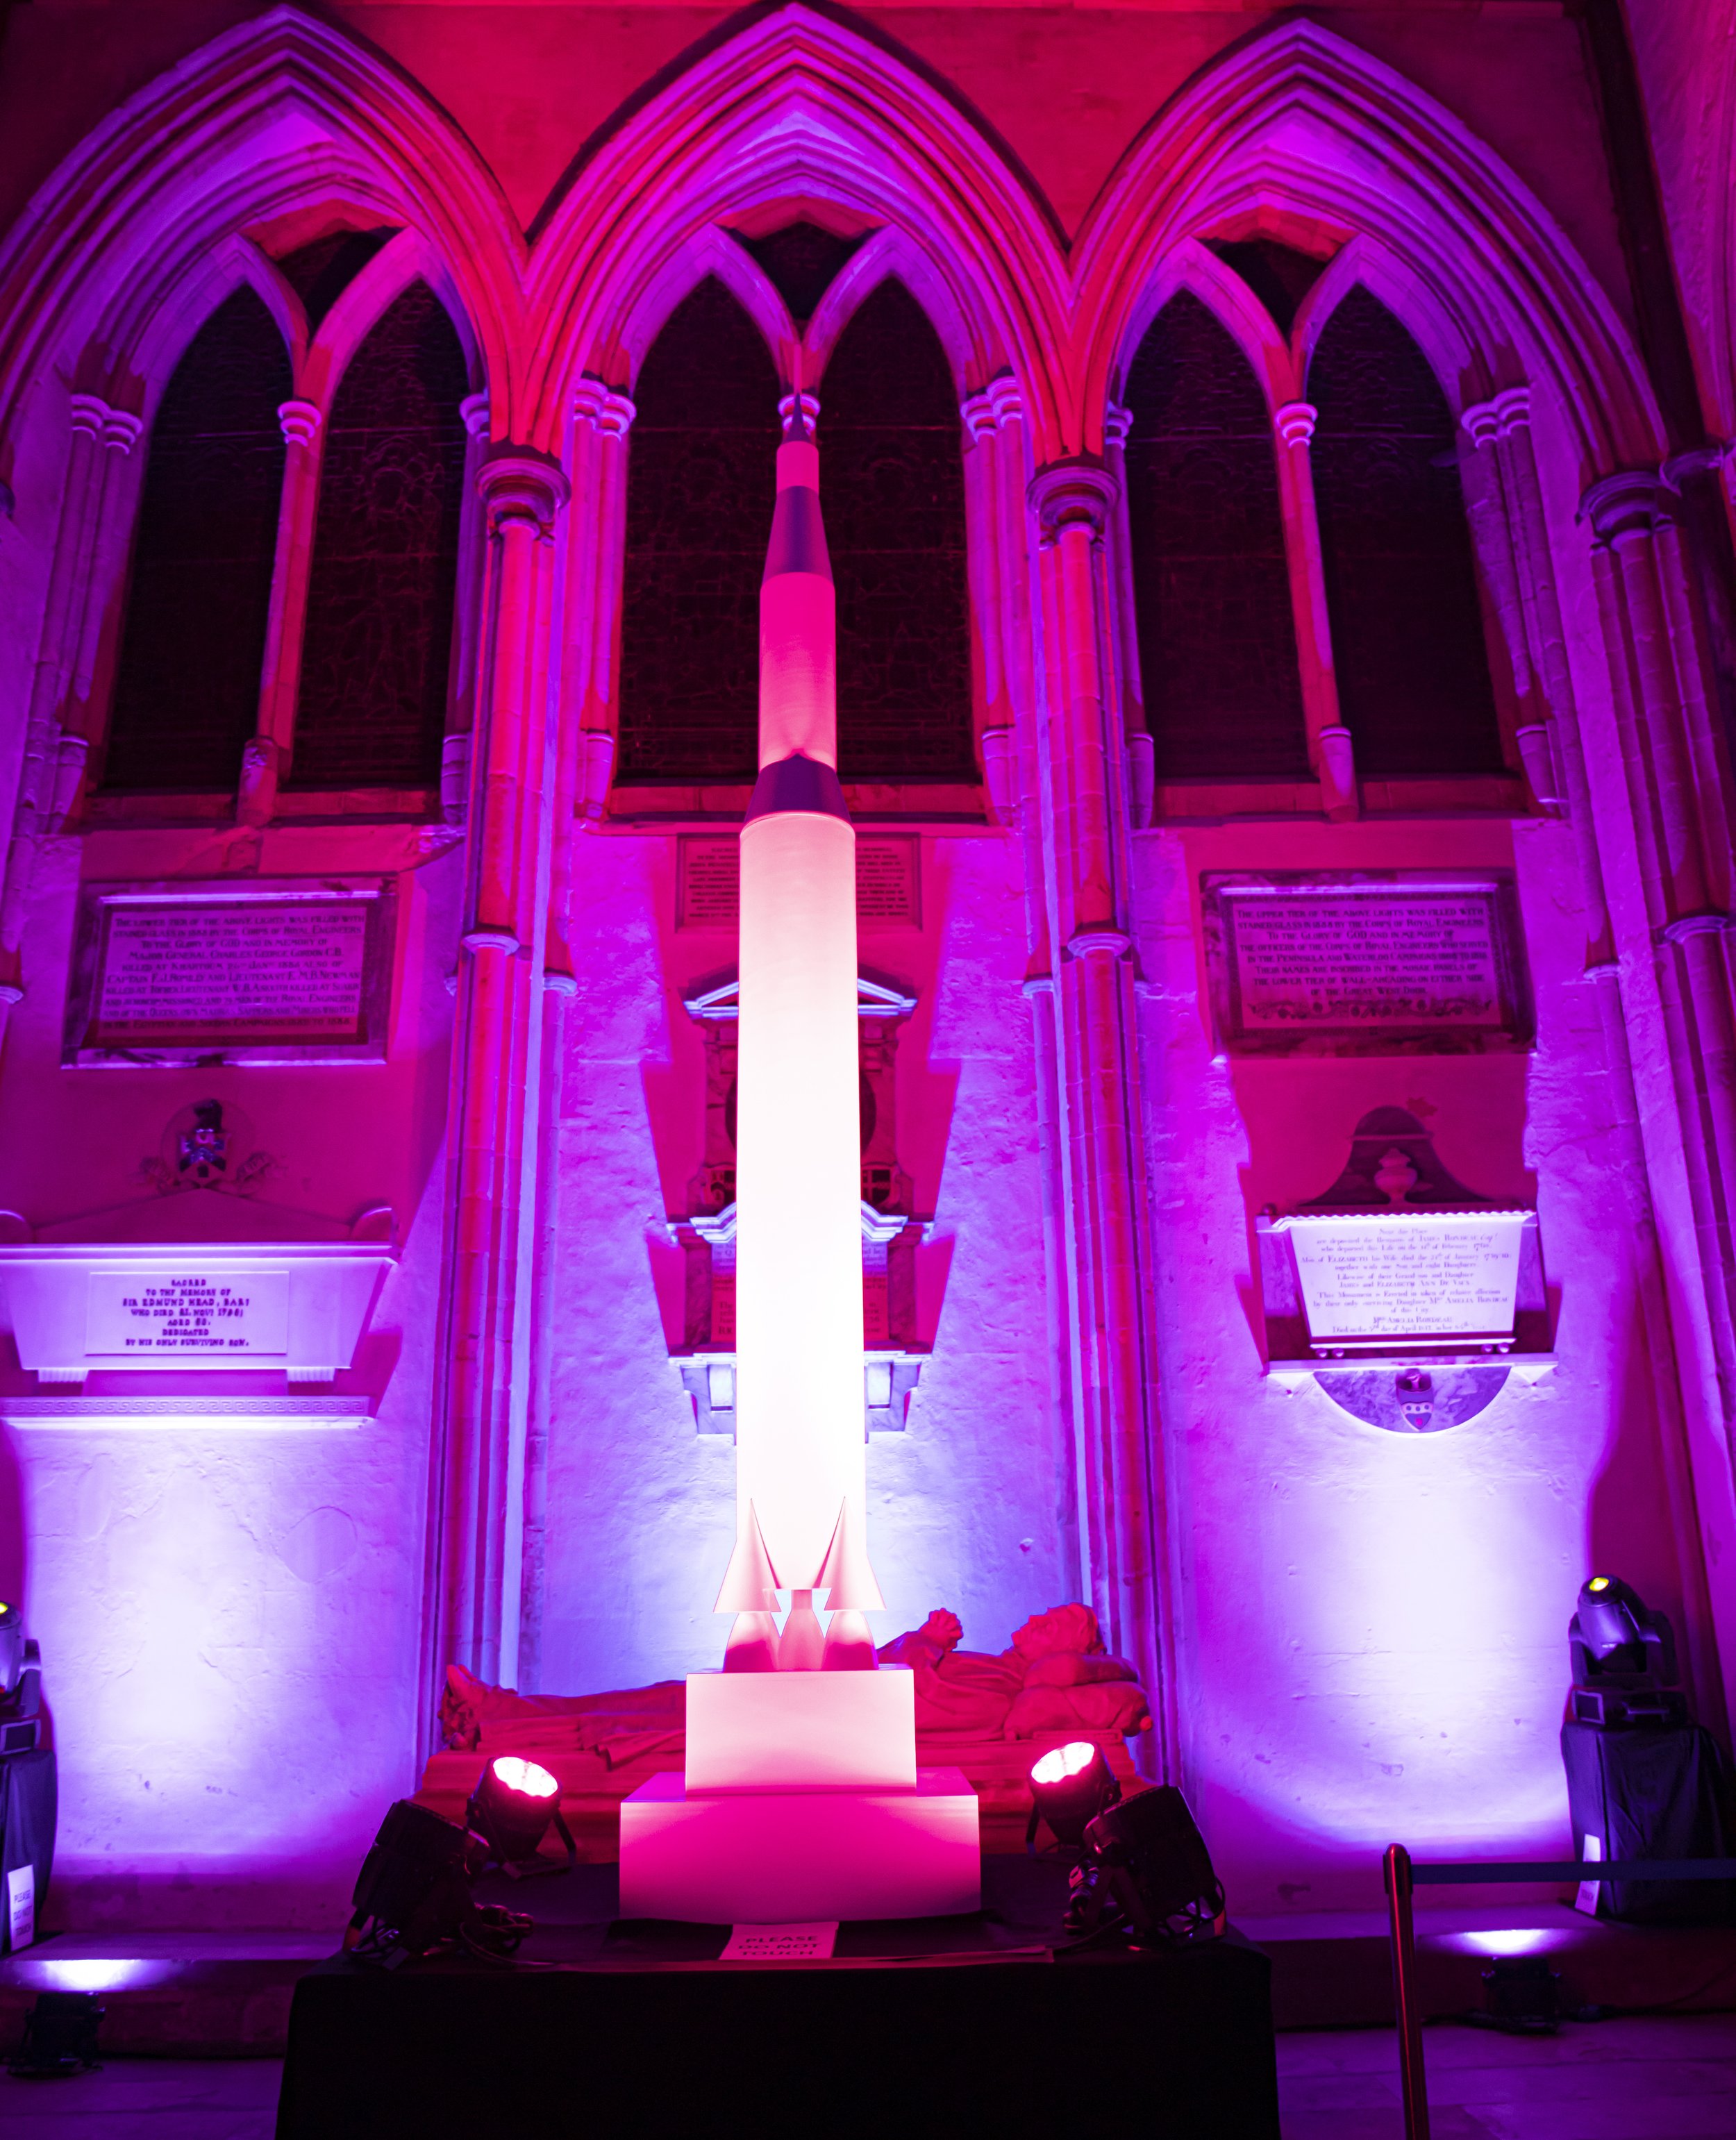 Rochester Cathedral space voyage Luxmuralis 2021_2.jpg